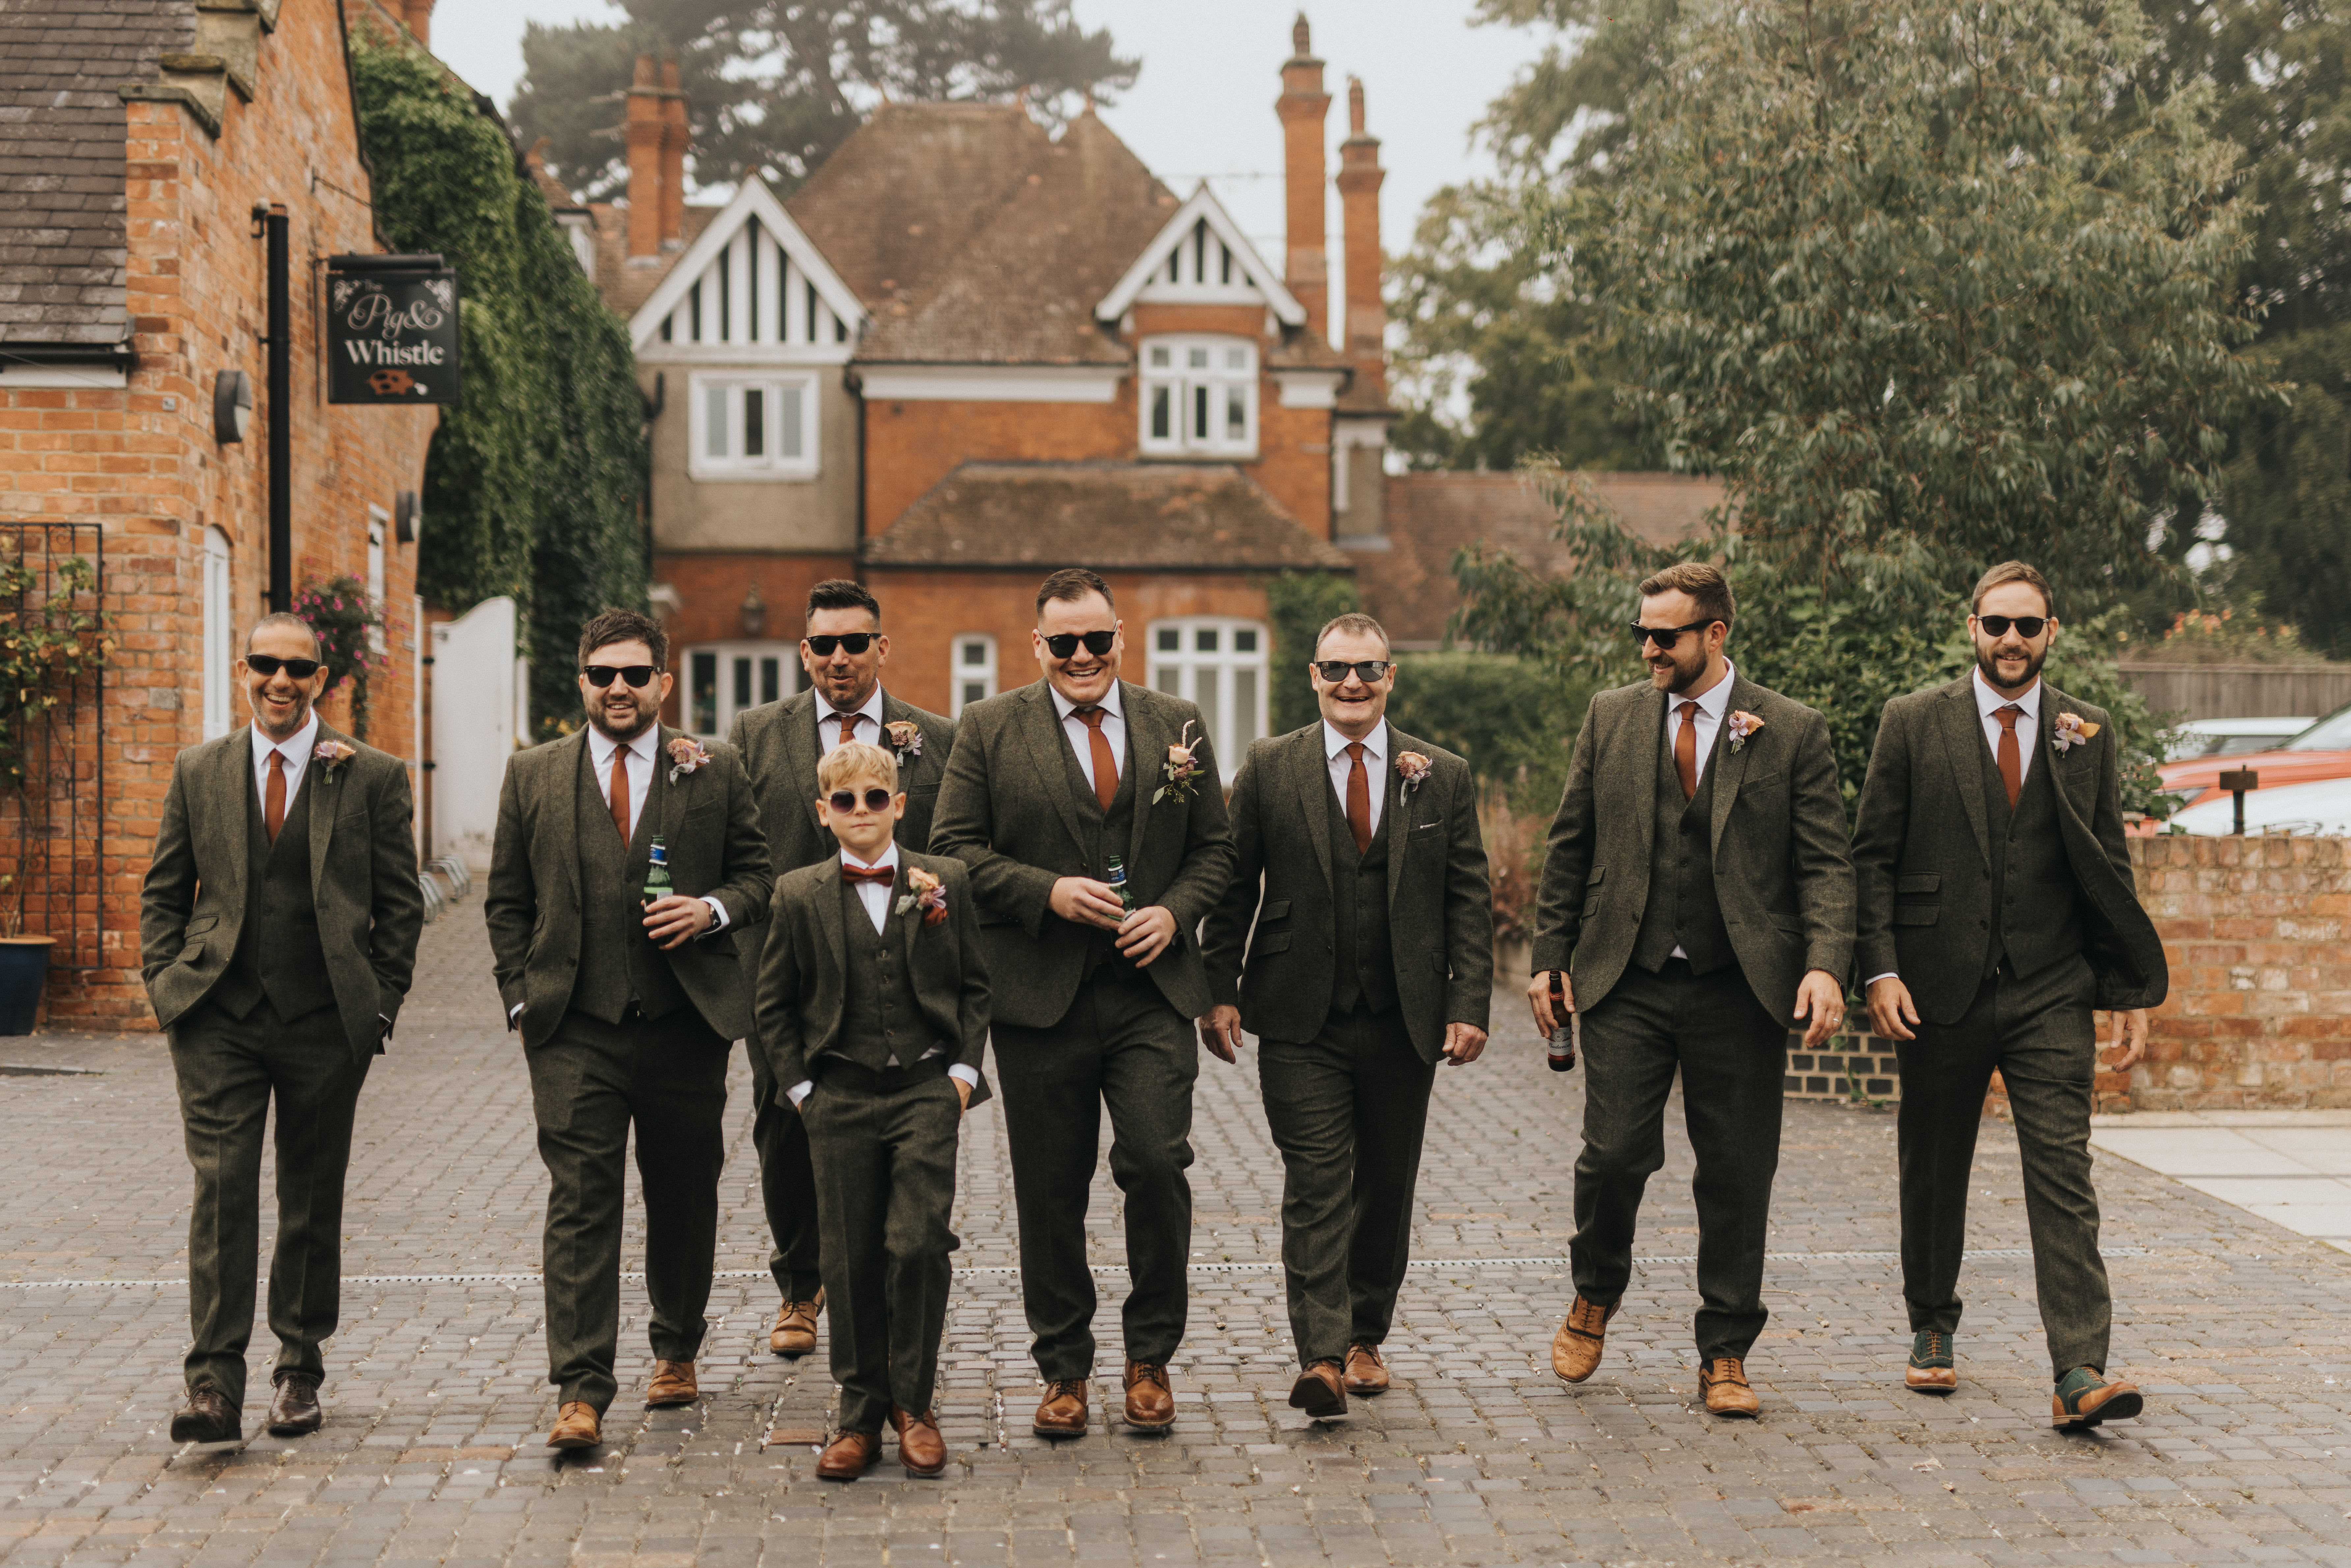 Ashley, the groom, channeled total autumn vibes with his green tweed suit from Fielder Ellis (now closed). He also wore personalised cufflinks with his and Chloe's initials and wedding date on them.